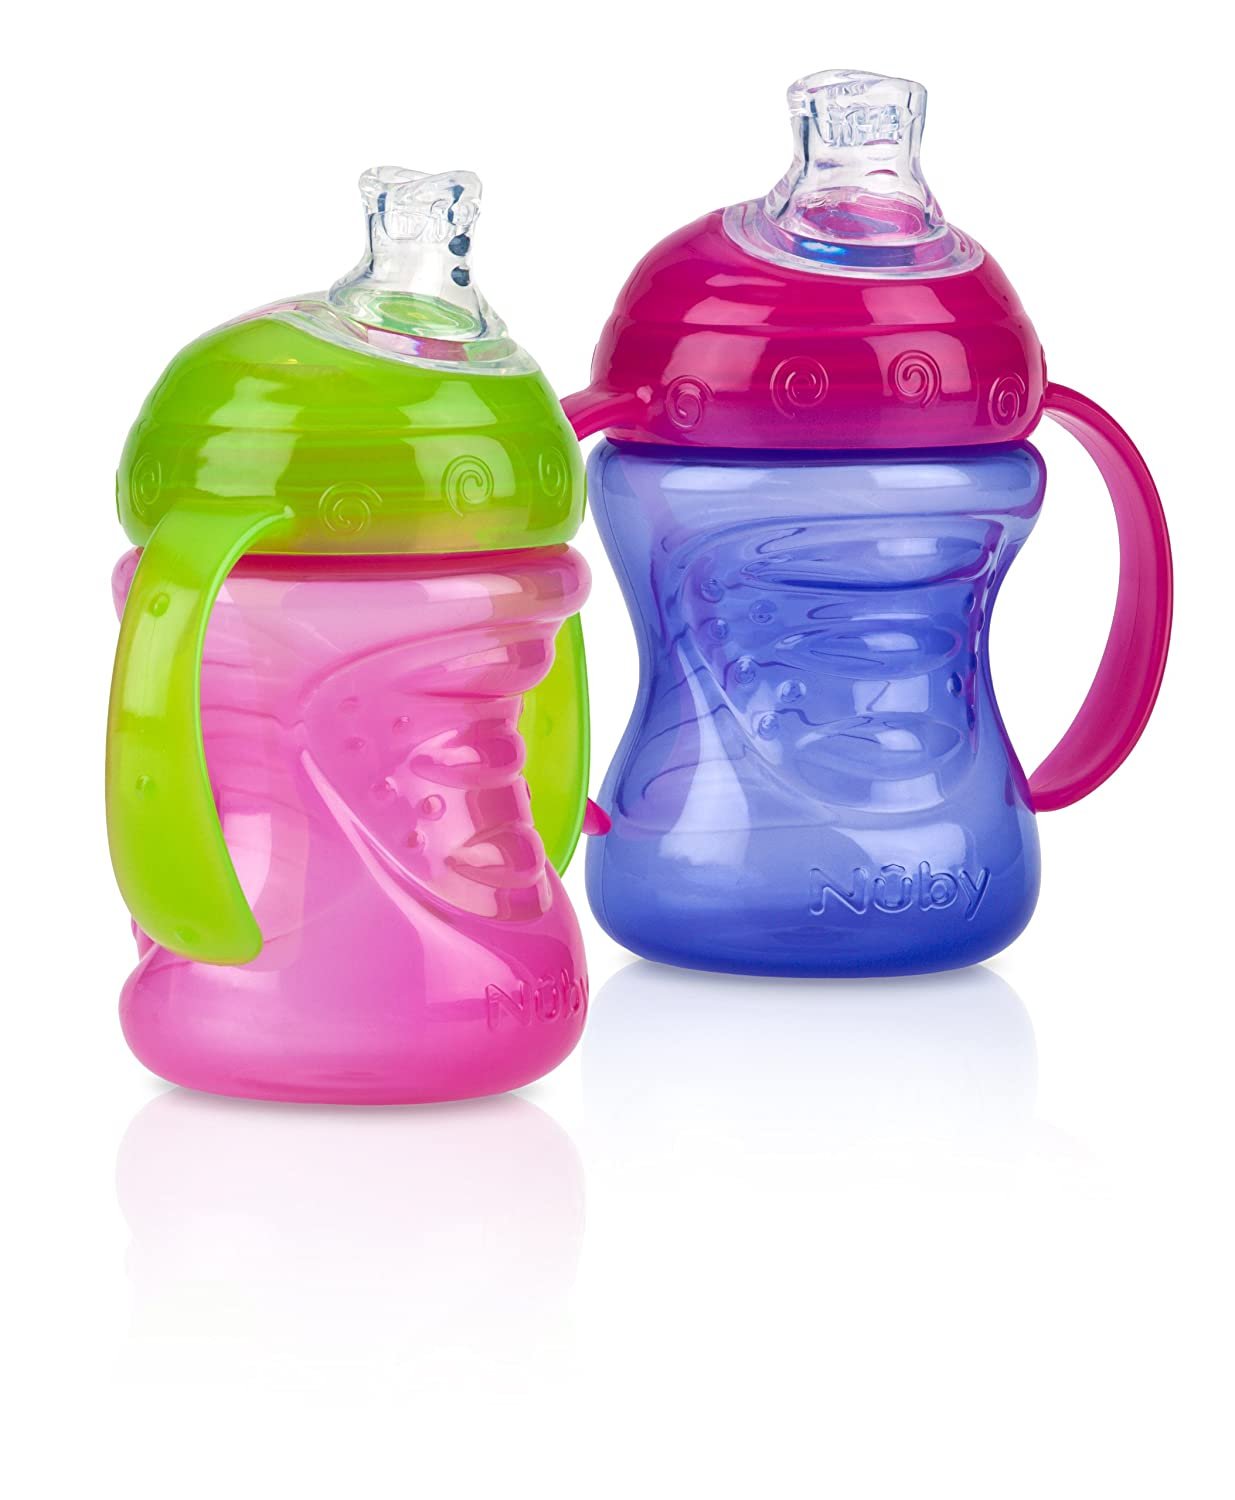 Nuby Two-Handle No-Spill Super Spout Grip N' Sip Cups, 8 Ounce (2 Count, Multi)